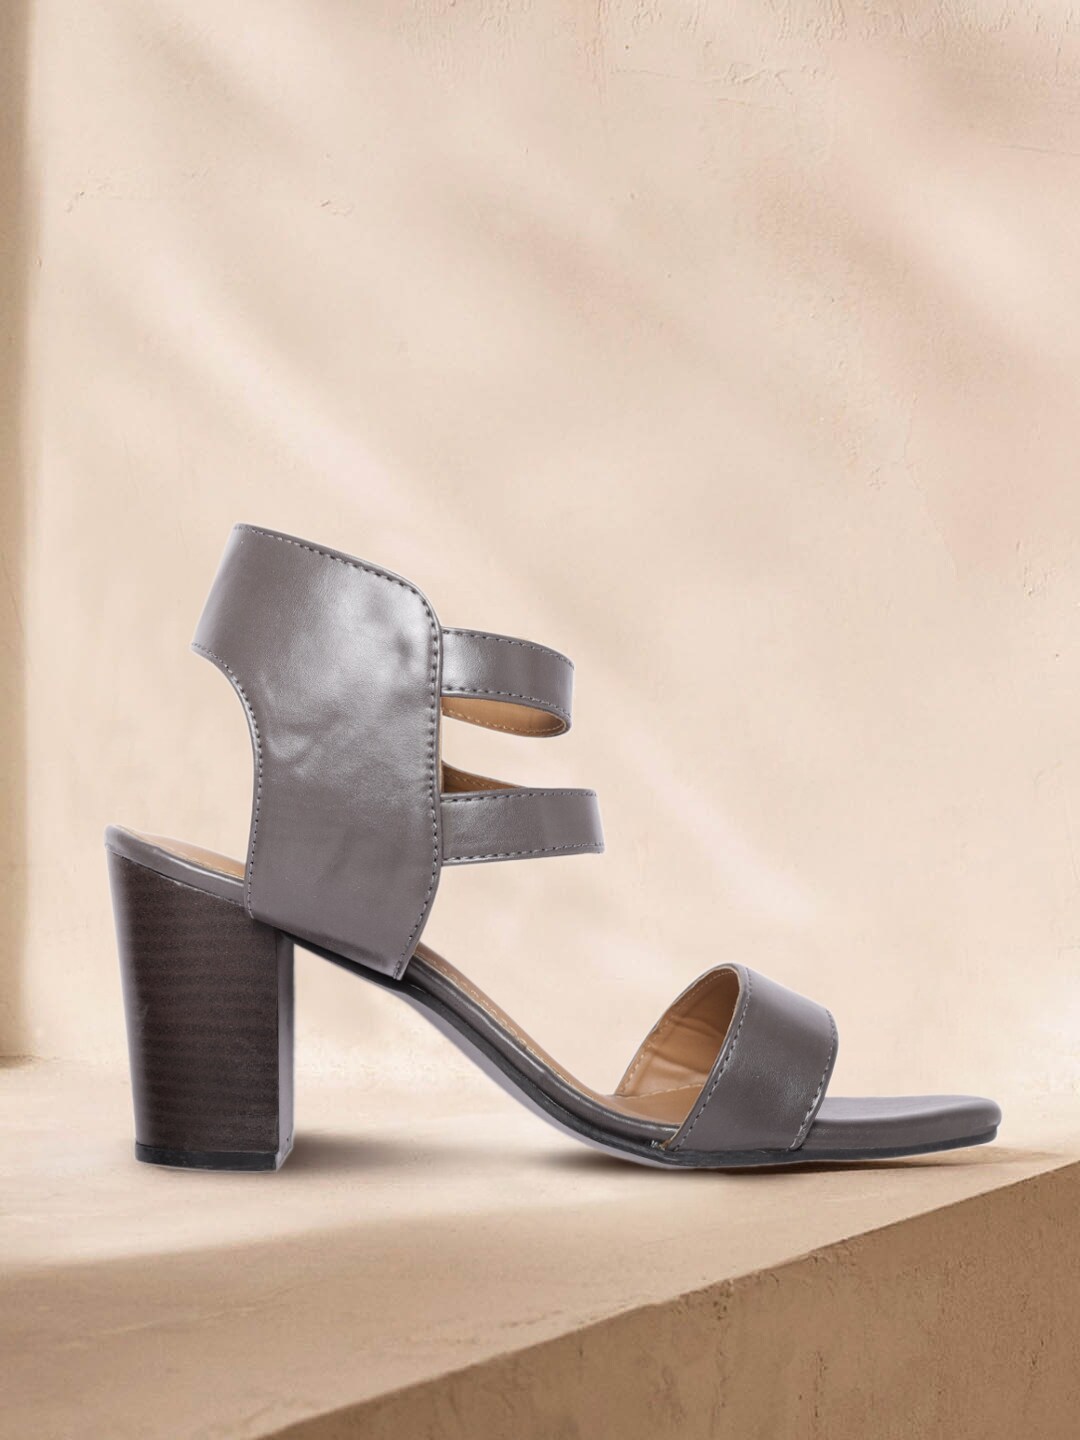 The Roadster Lifestyle Co Grey Solid Block Heels Price in India